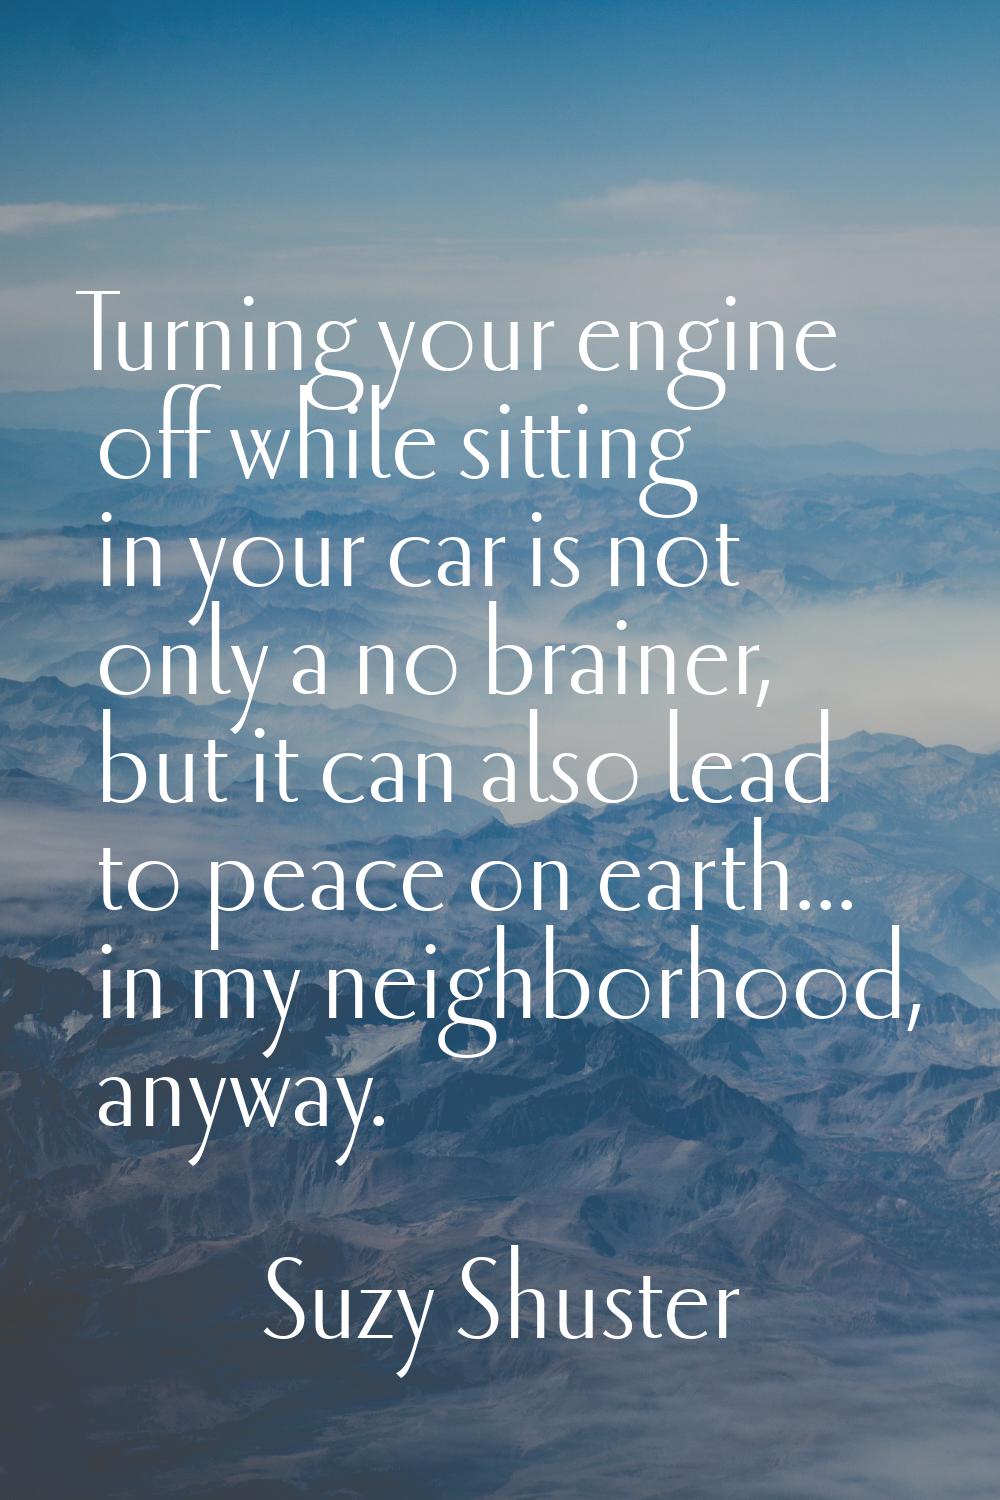 Turning your engine off while sitting in your car is not only a no brainer, but it can also lead to